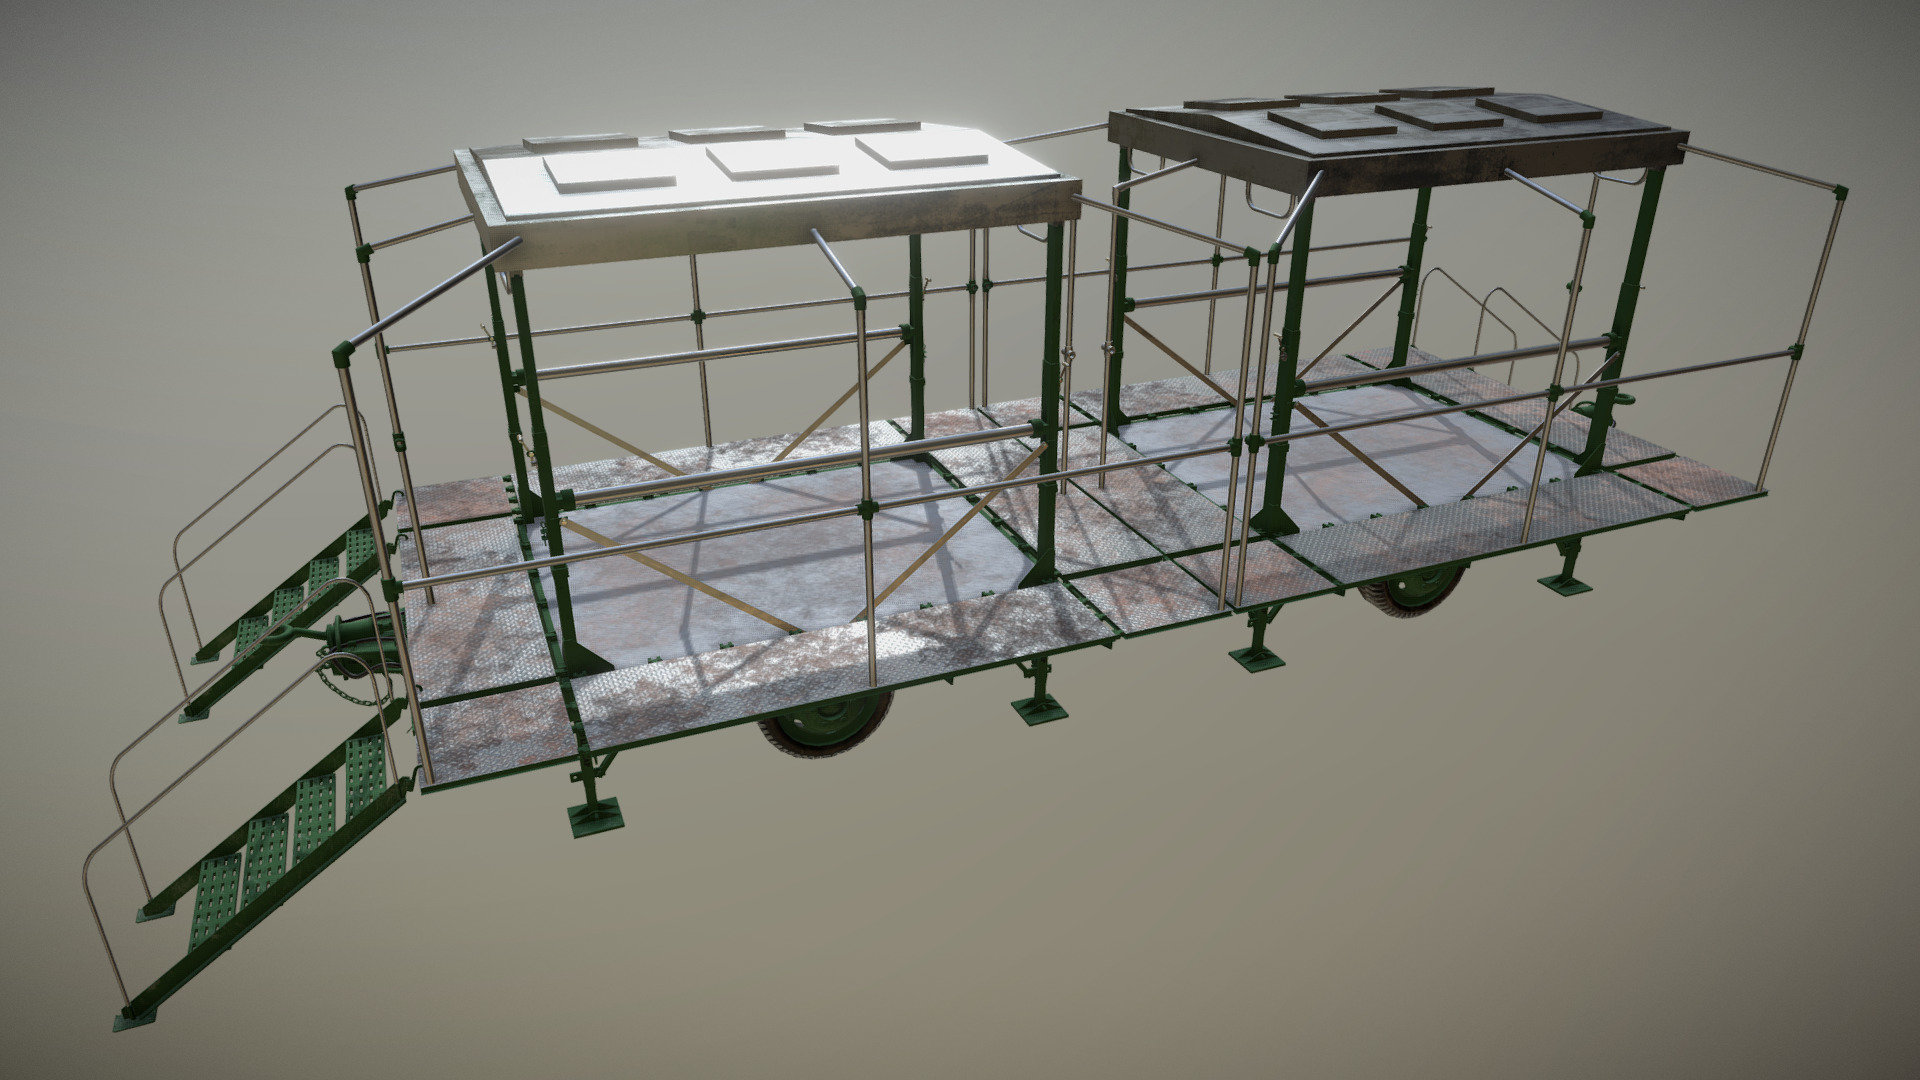 Military Kitchen Trailer. This is the opened variation with two of the sam evheicles attached to each other along sith stairs. A tent goes over it, however, it would interfere with showcasing the interior so I decided to leave it out 3d model